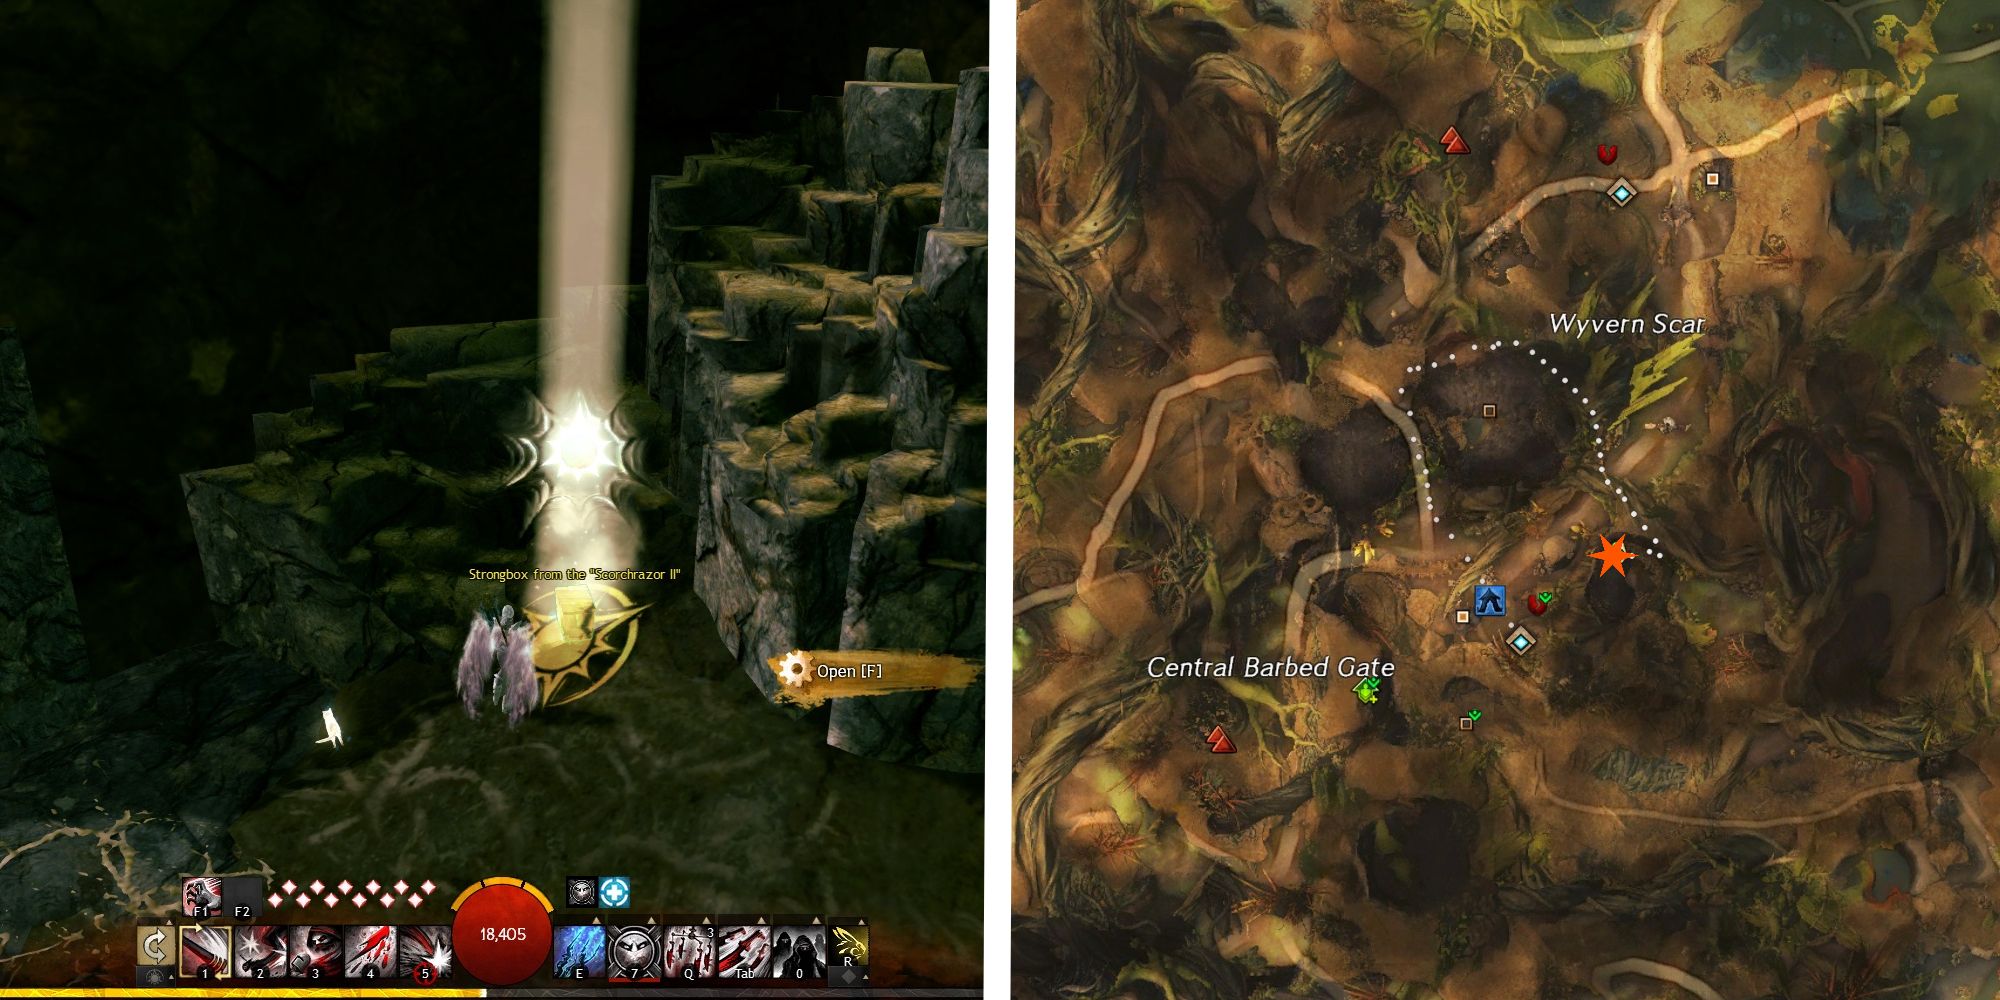 image of player at scorchrazor II strongbox next to image of location on map